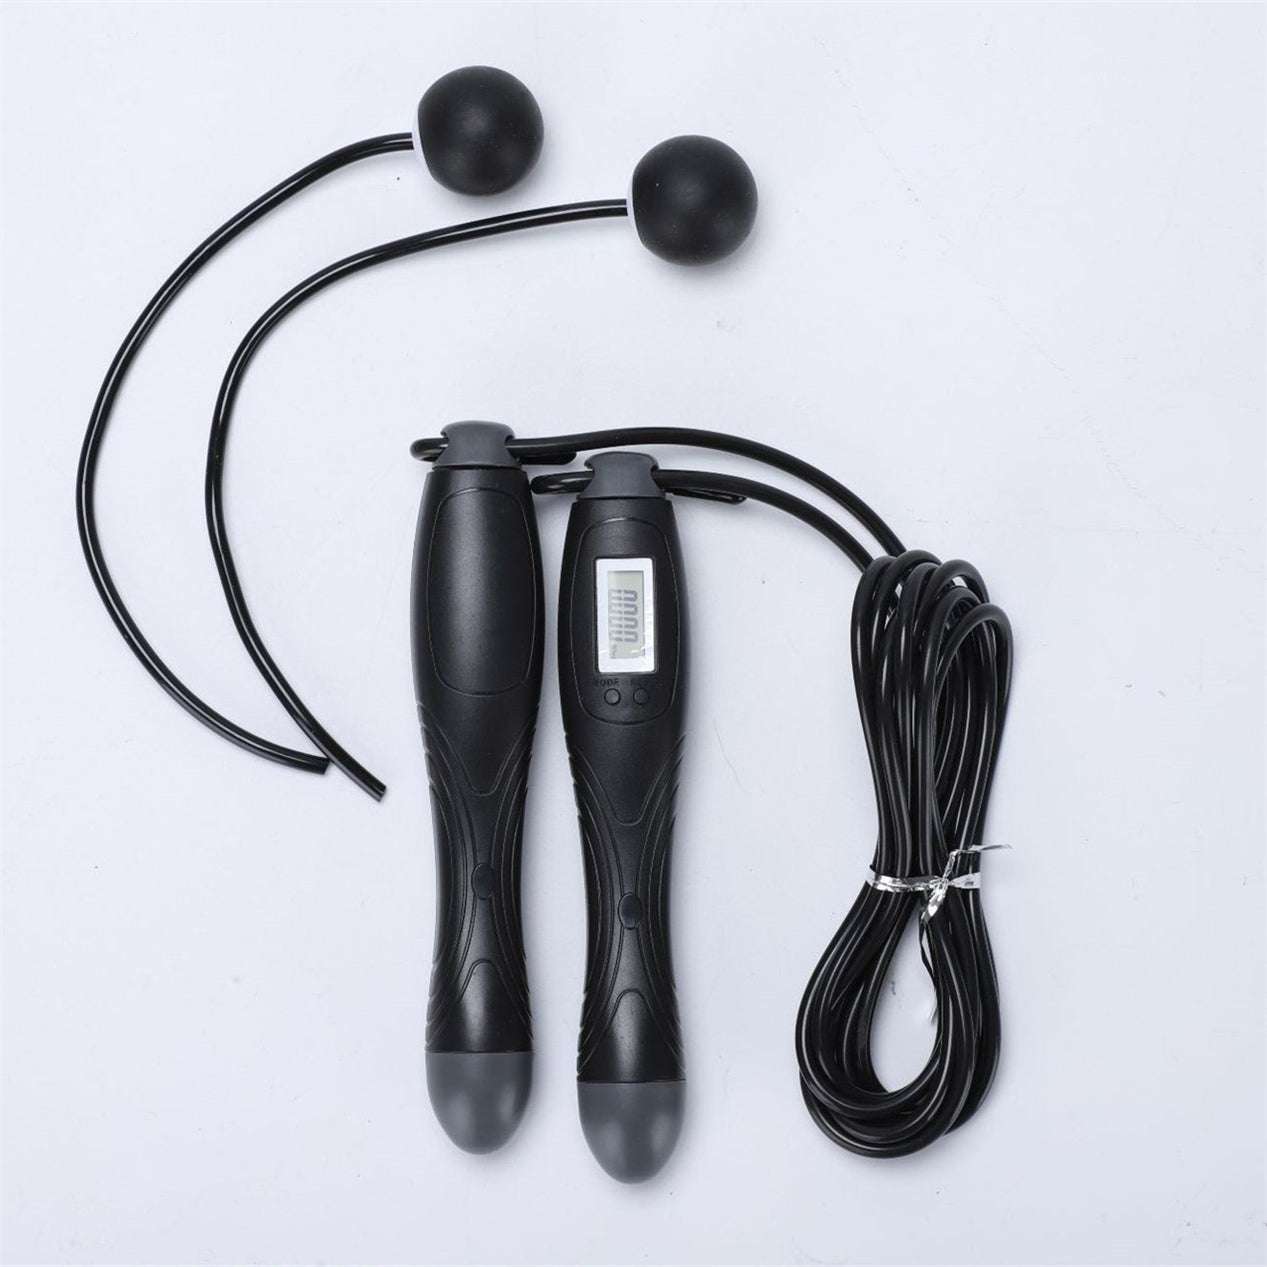 Cordless skipping rope, electronic fitness equipment, Sparq Mart - available at Sparq Mart